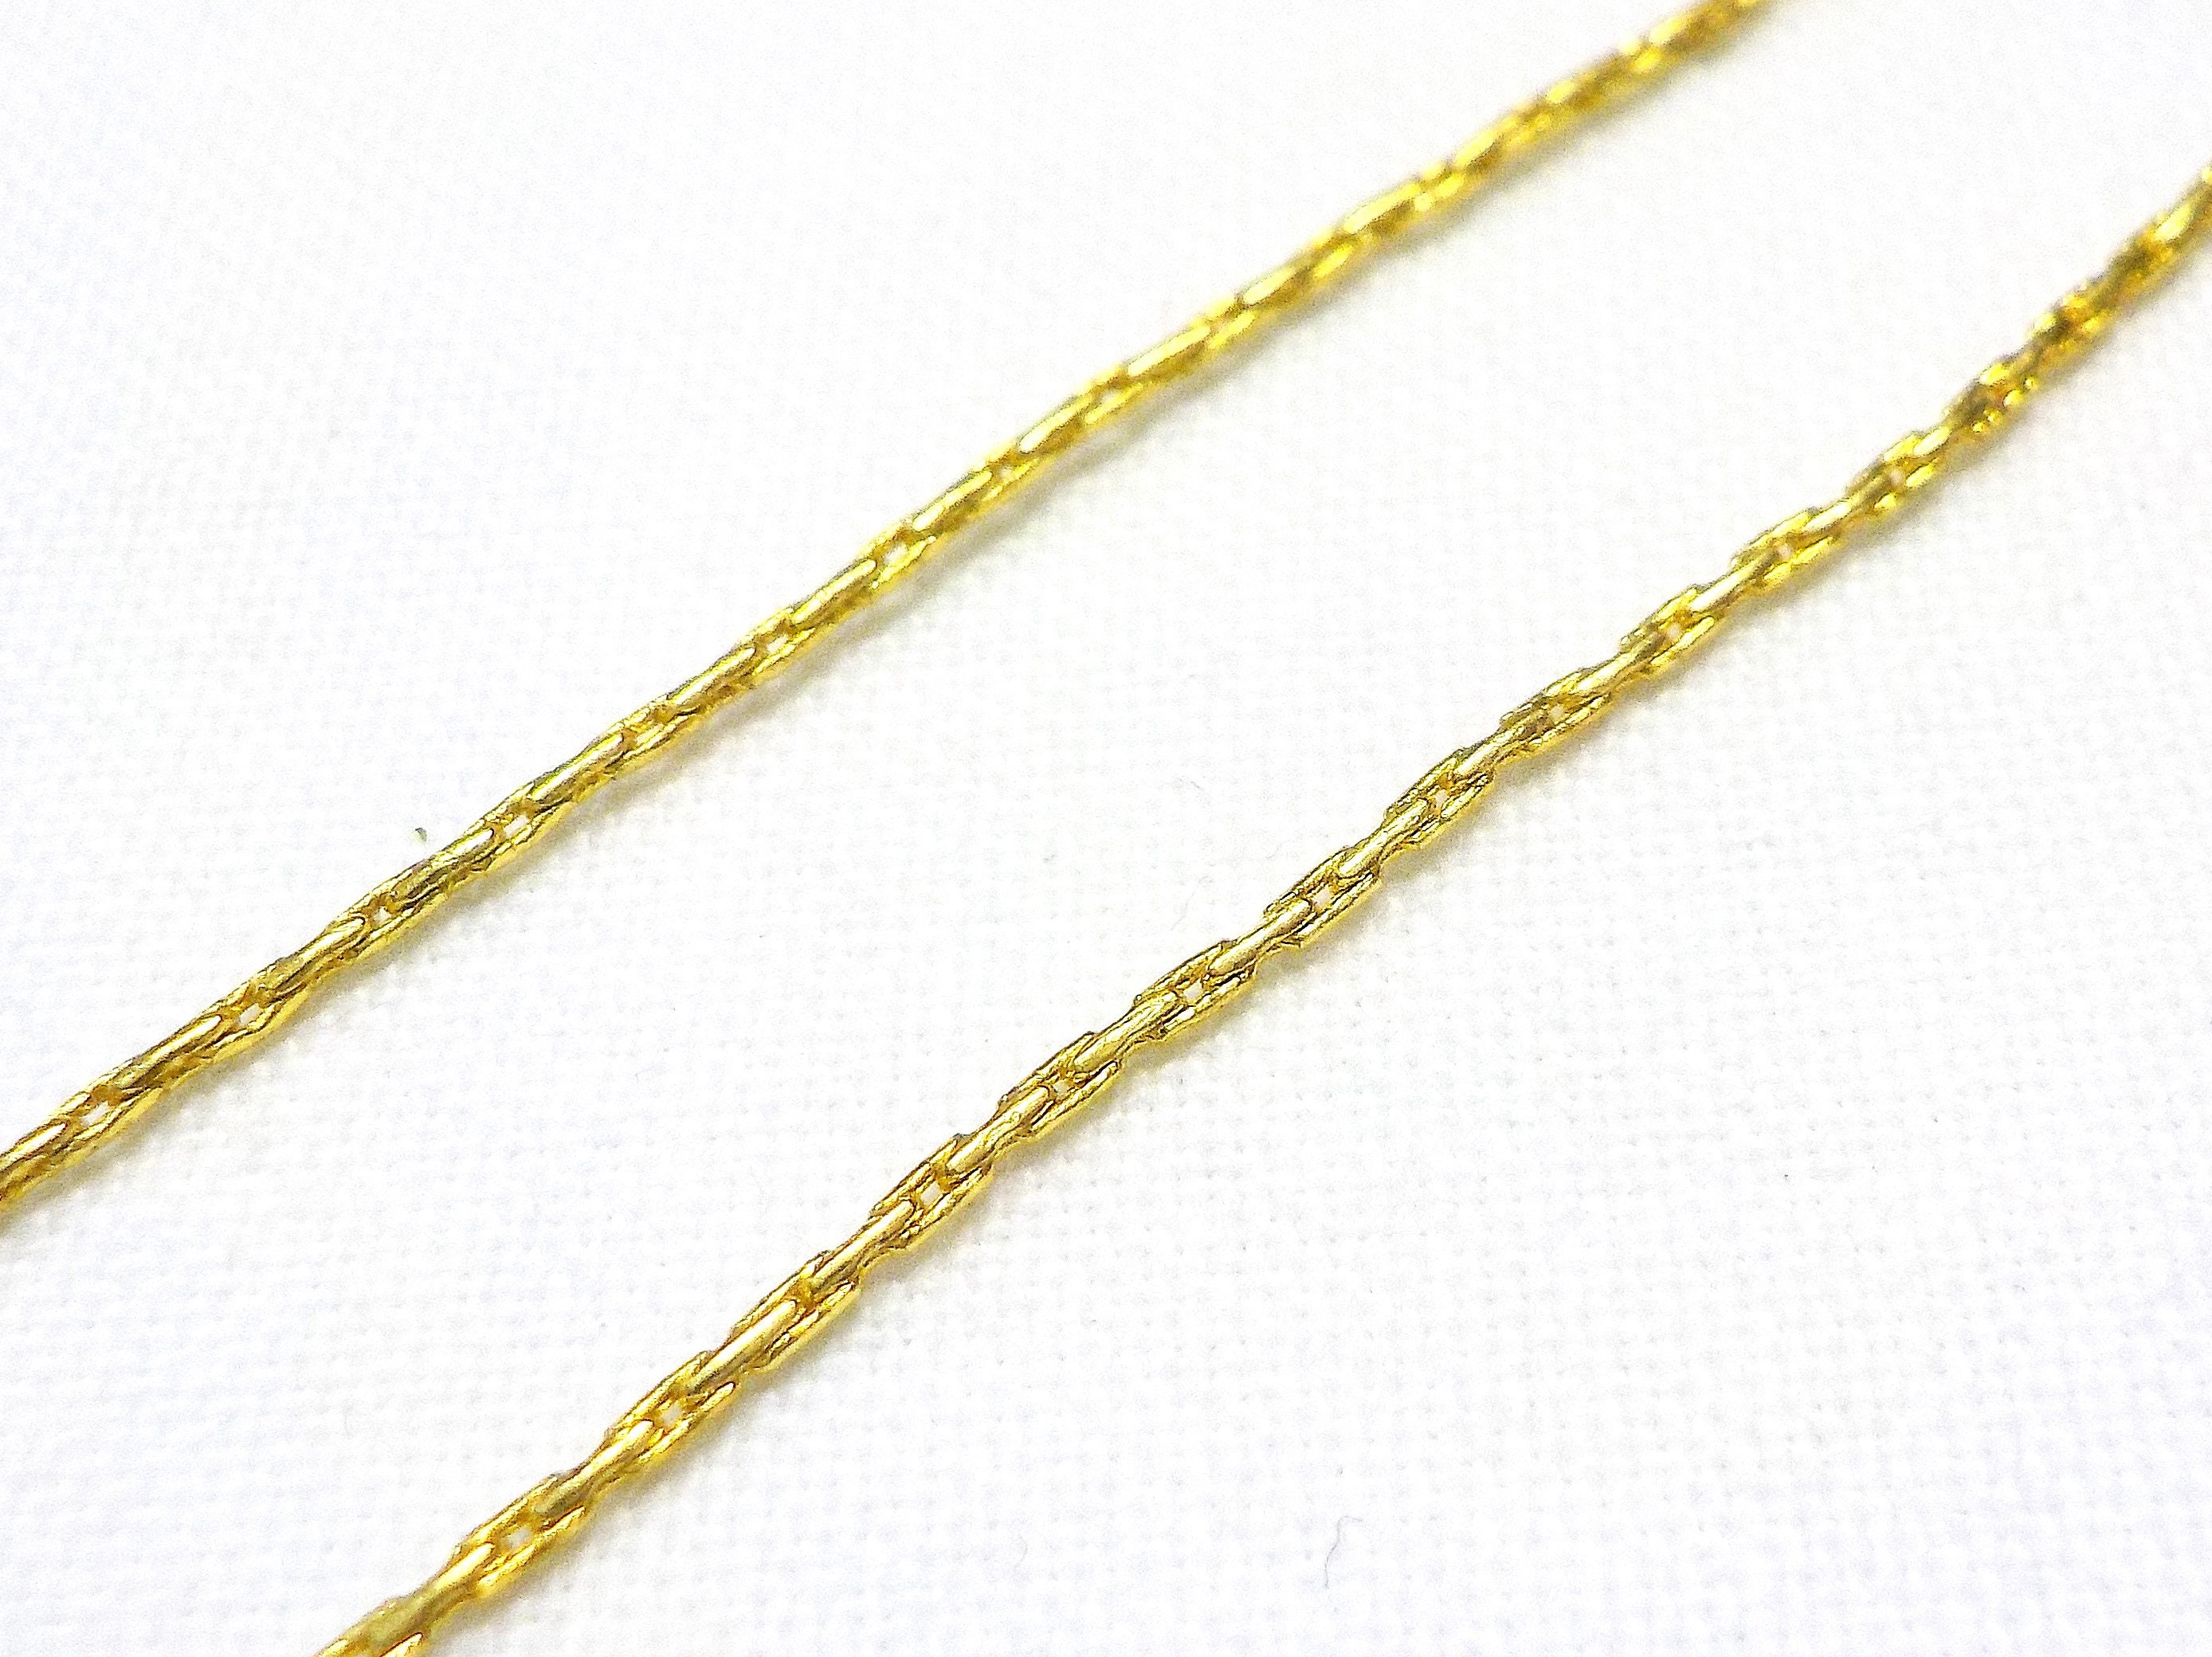 Gold Plated Over Brass Square Cobra Chain, Flat Cobra Chain, Snake Chain  1mm 30cm 1 Piece 